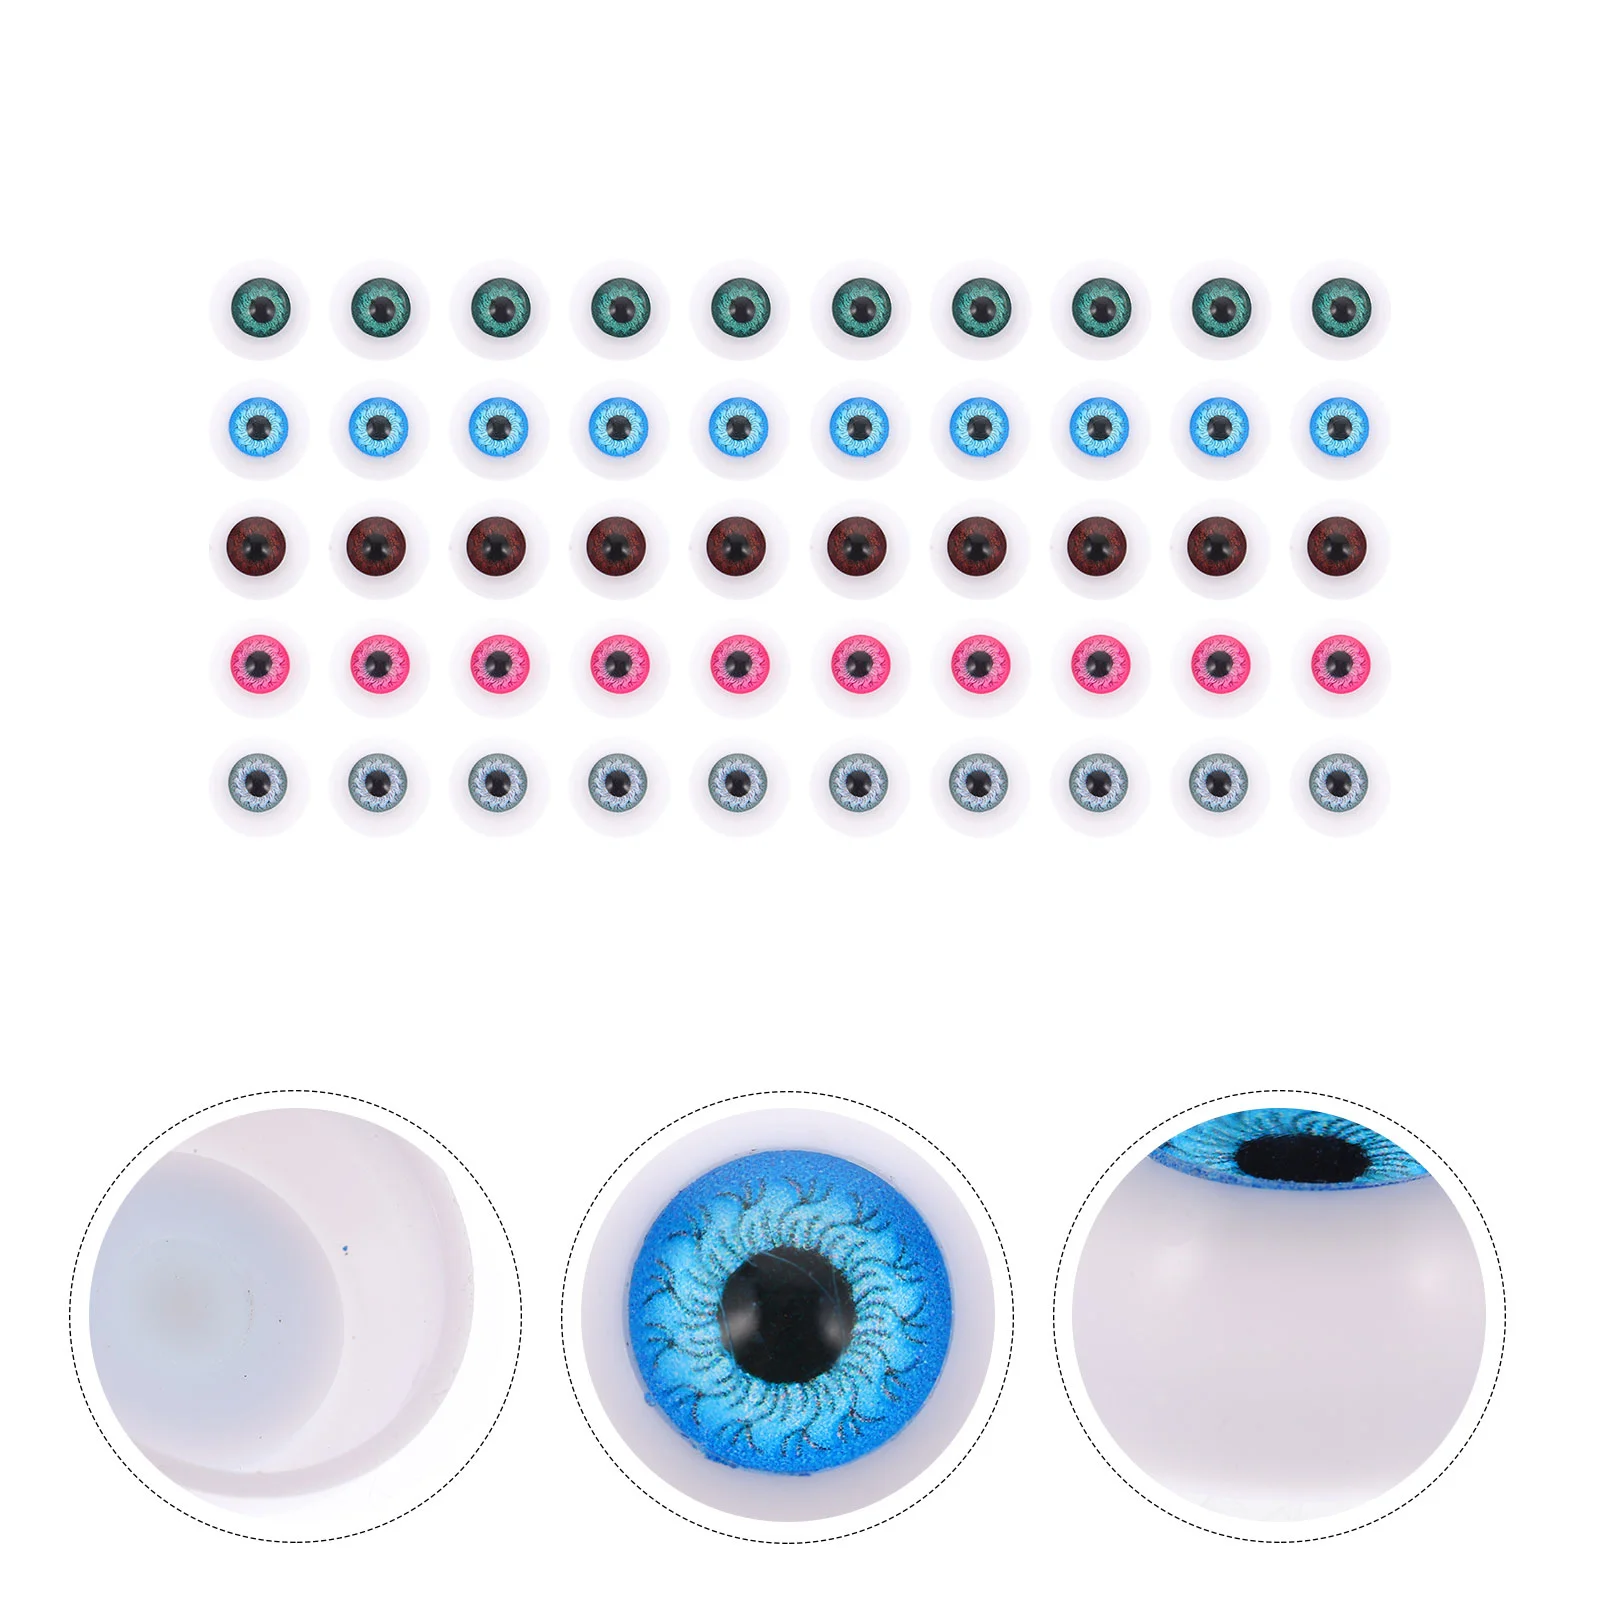 50 Pcs Decor Artificial Eyes Acrylic Eyes Realistic Three-dimensional DIY Crafts Acrylic Supplies for origin in china high quality medical supplies artificial above knee prosthetic leg